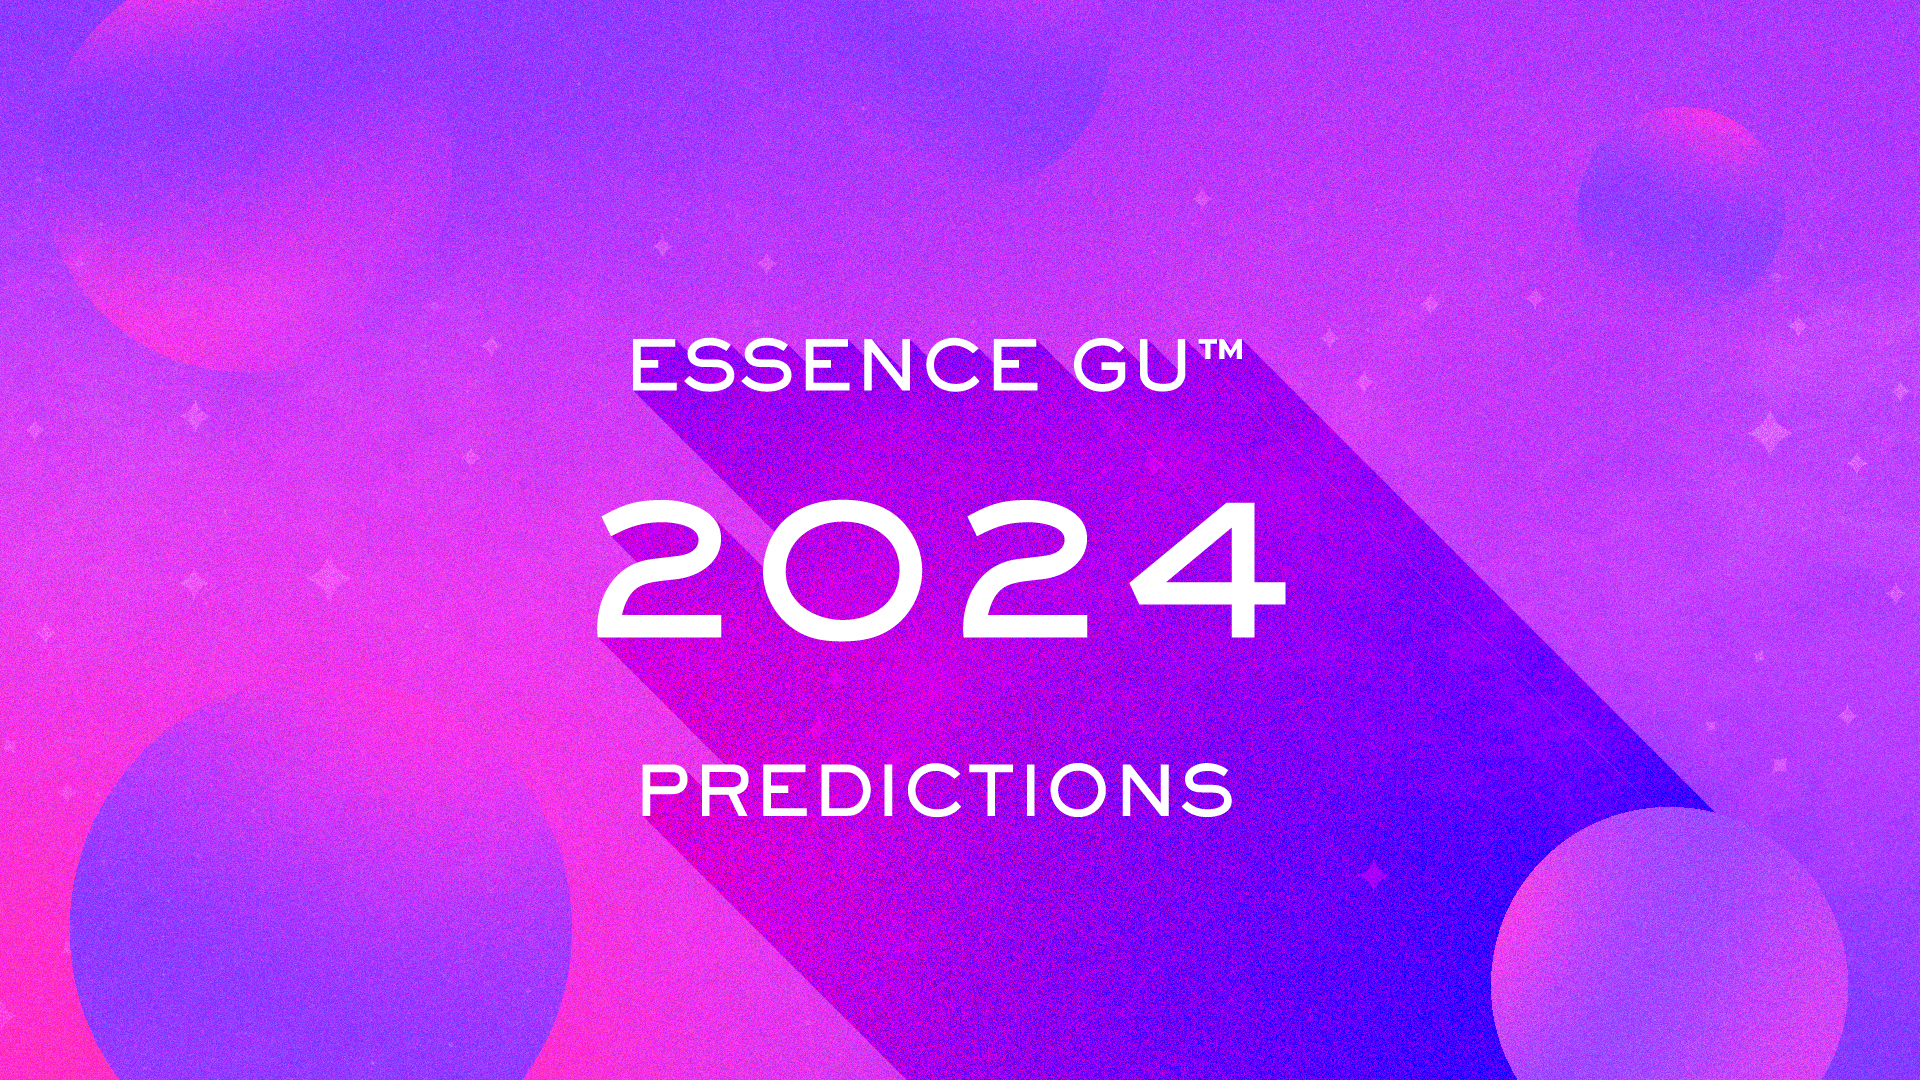 GU Predictions: Here’s What Might Shake Up Society In 2024